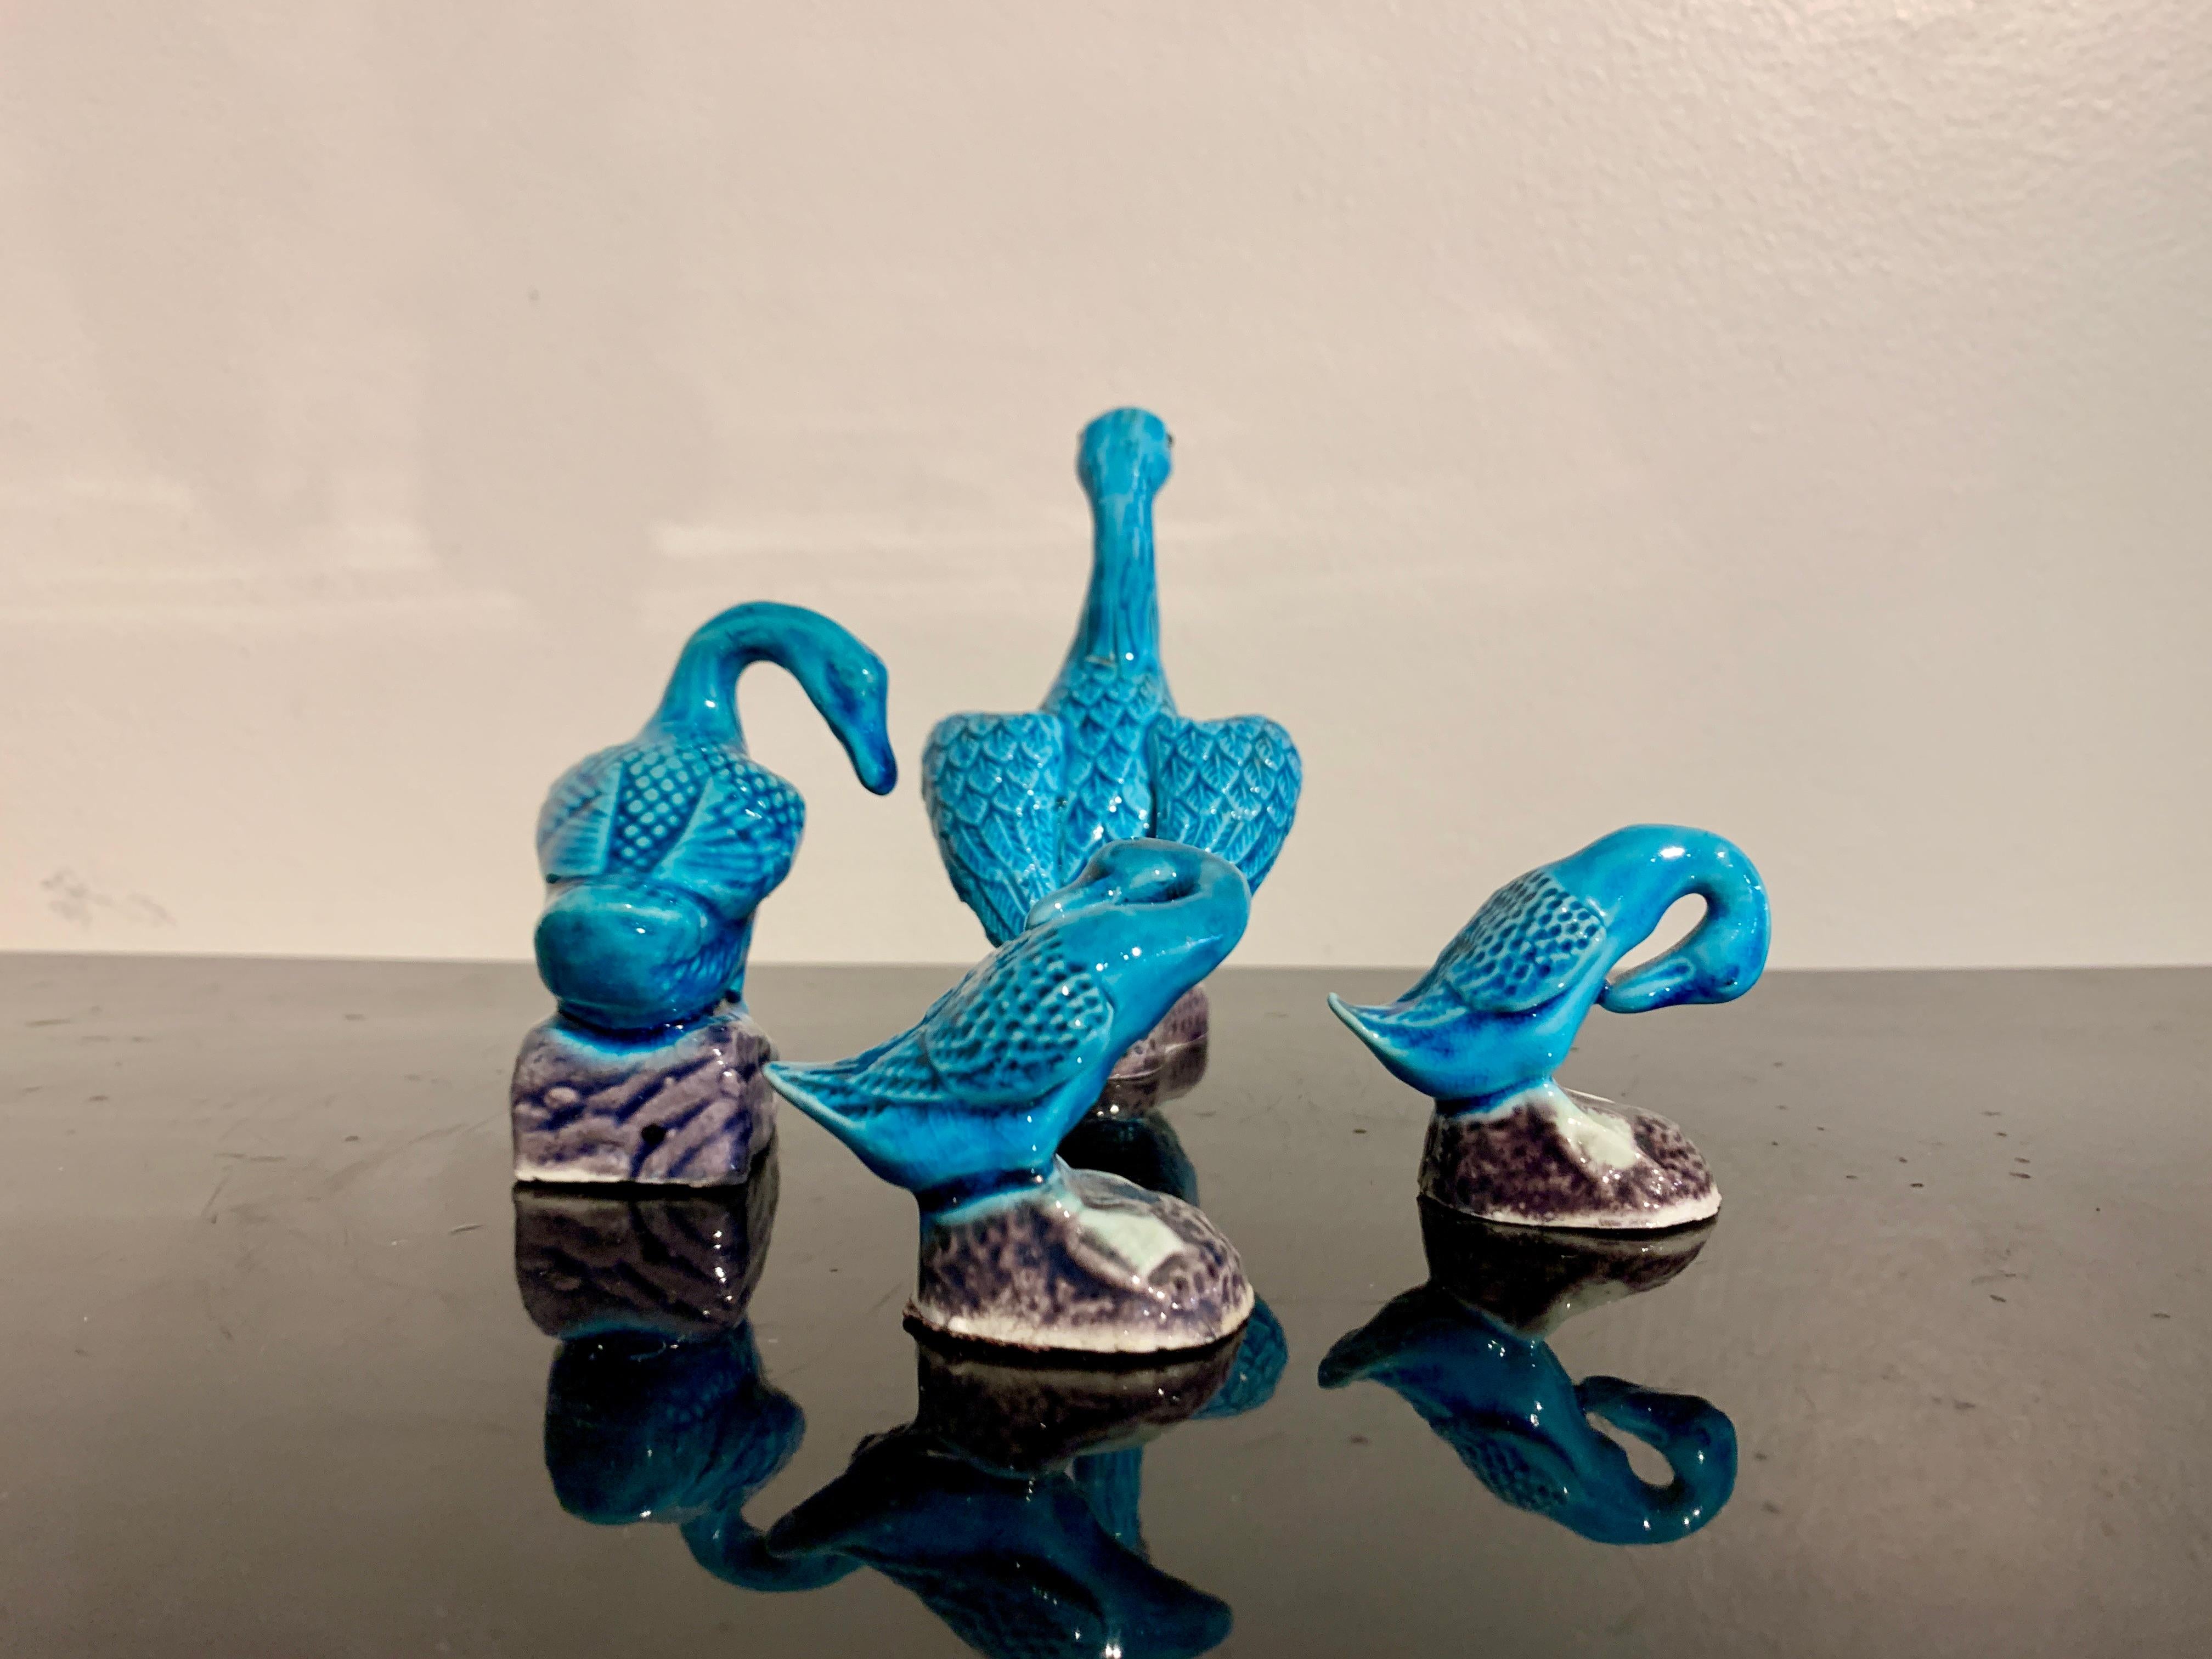 Chinese Export Turquoise Glazed Ducks, Flock of 8, 1970's, China and Hong Kong For Sale 5